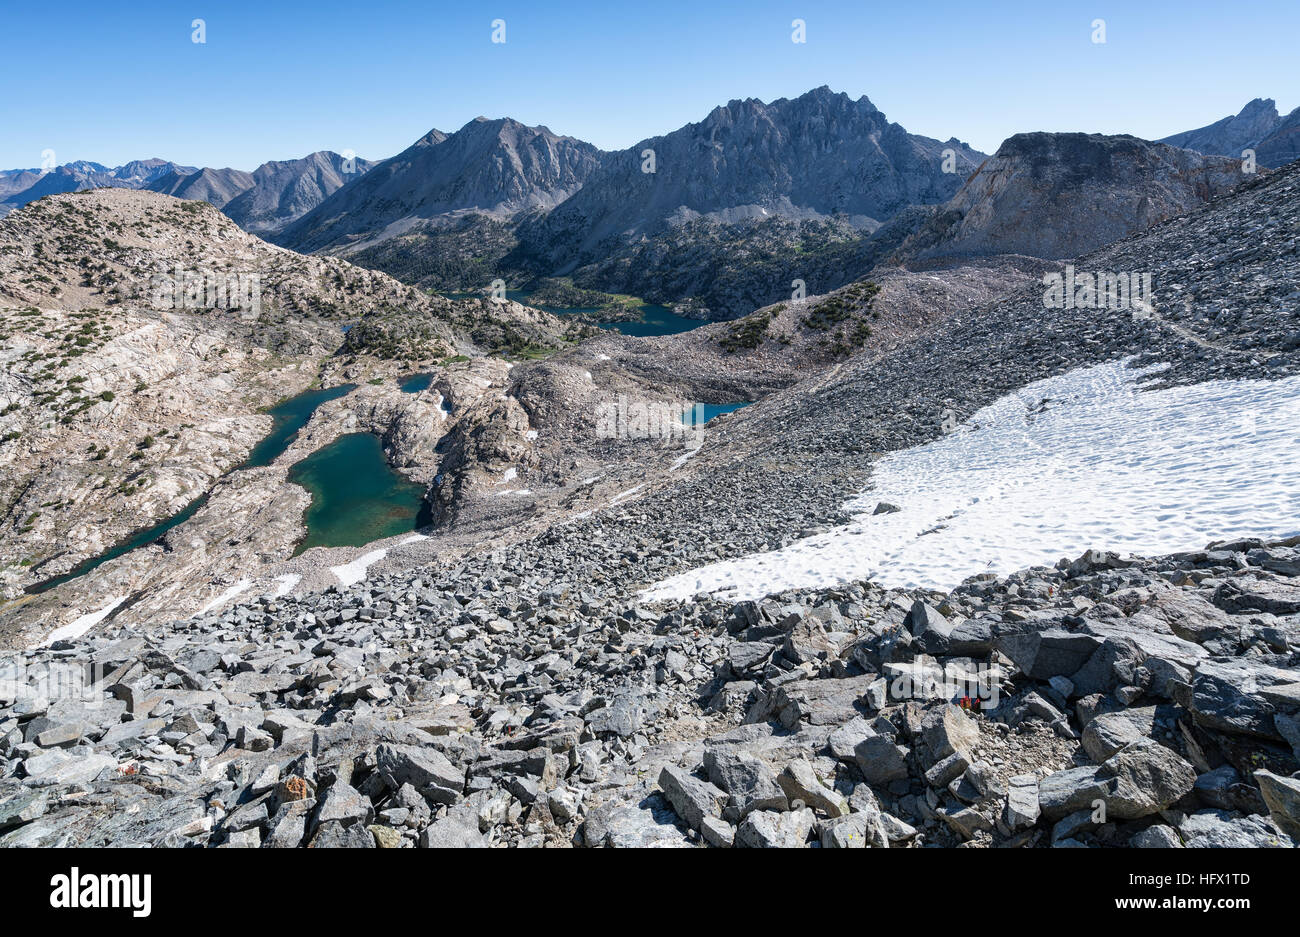 A view from Glen Pass, Kings Canyon National Park, California, United States of America, North America Stock Photo